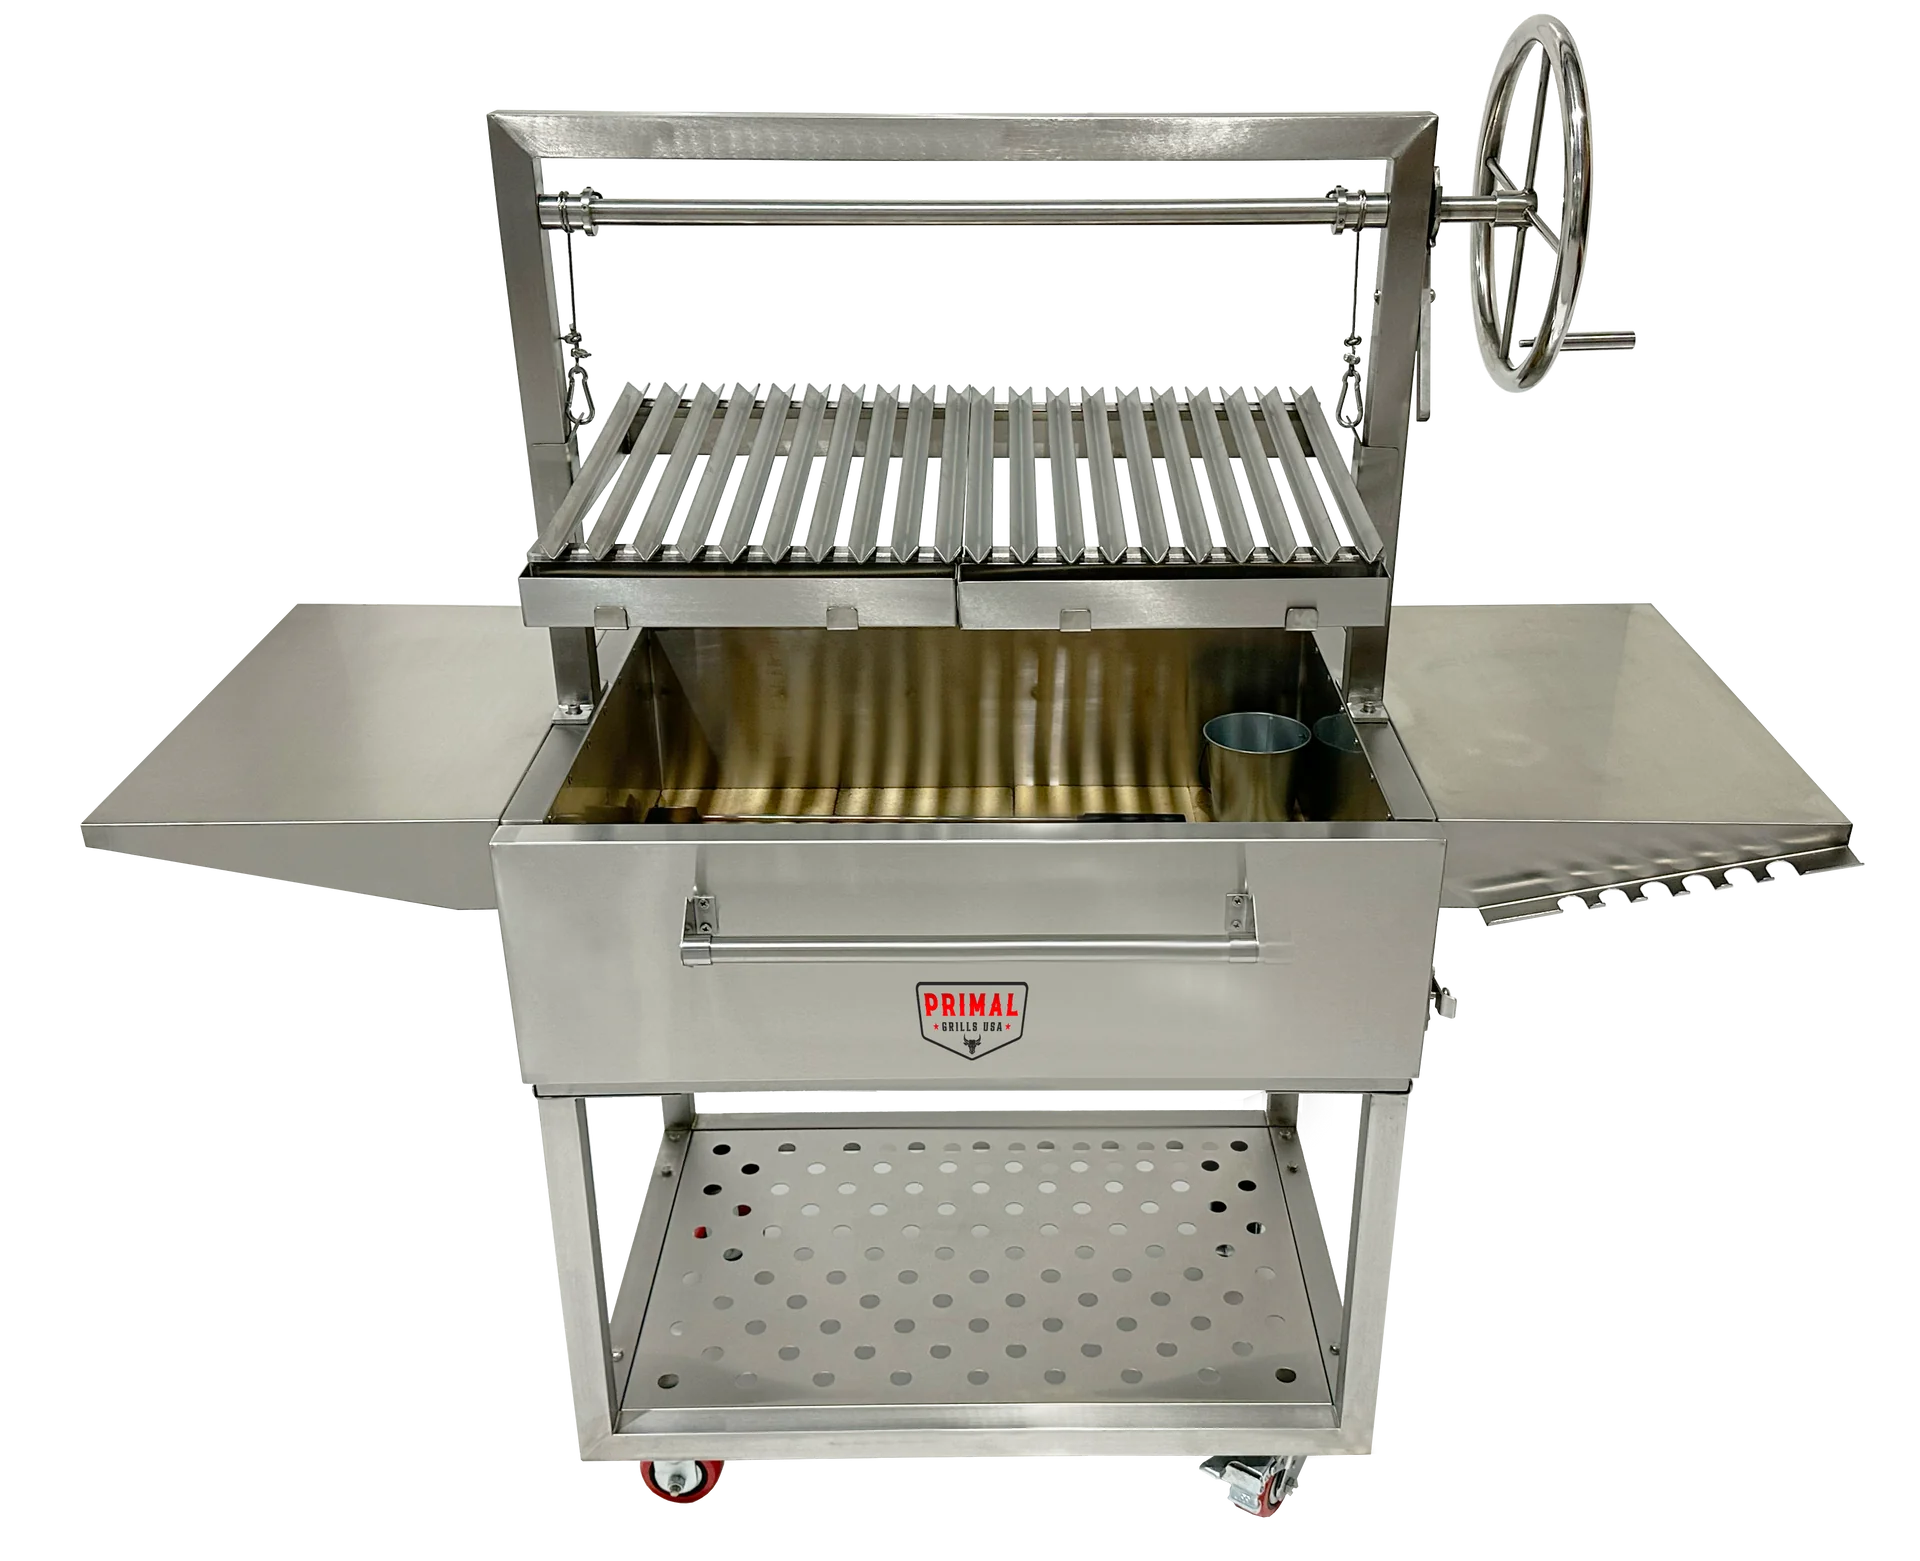 Primal Grills USA Pre Sale DEPOSIT! Grill Total Cost $3,999.00